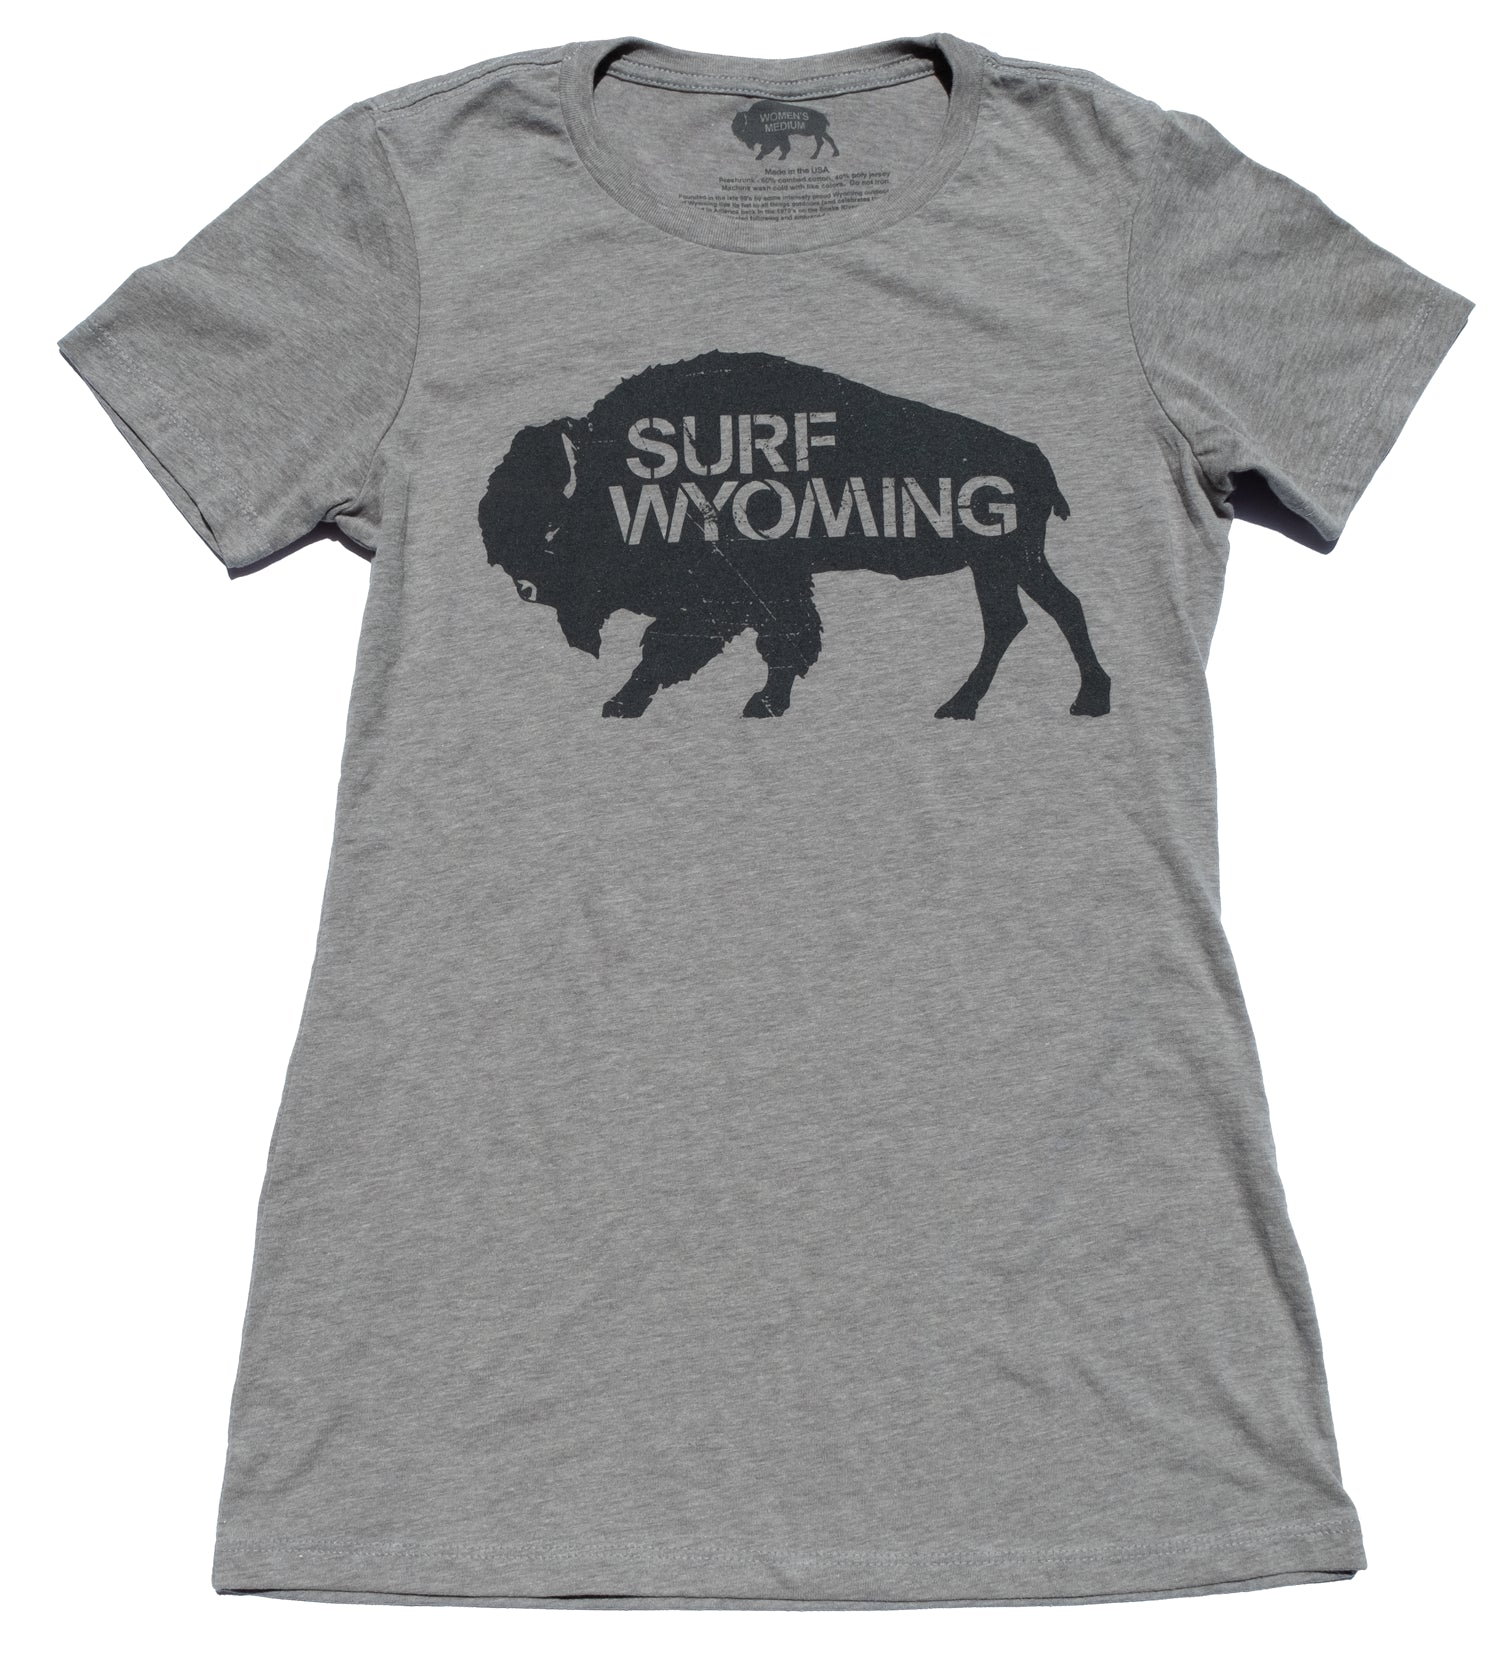 Surf Wyoming-Women's Surf Wyoming® Charcoal Bison Tee - Heather Grey-